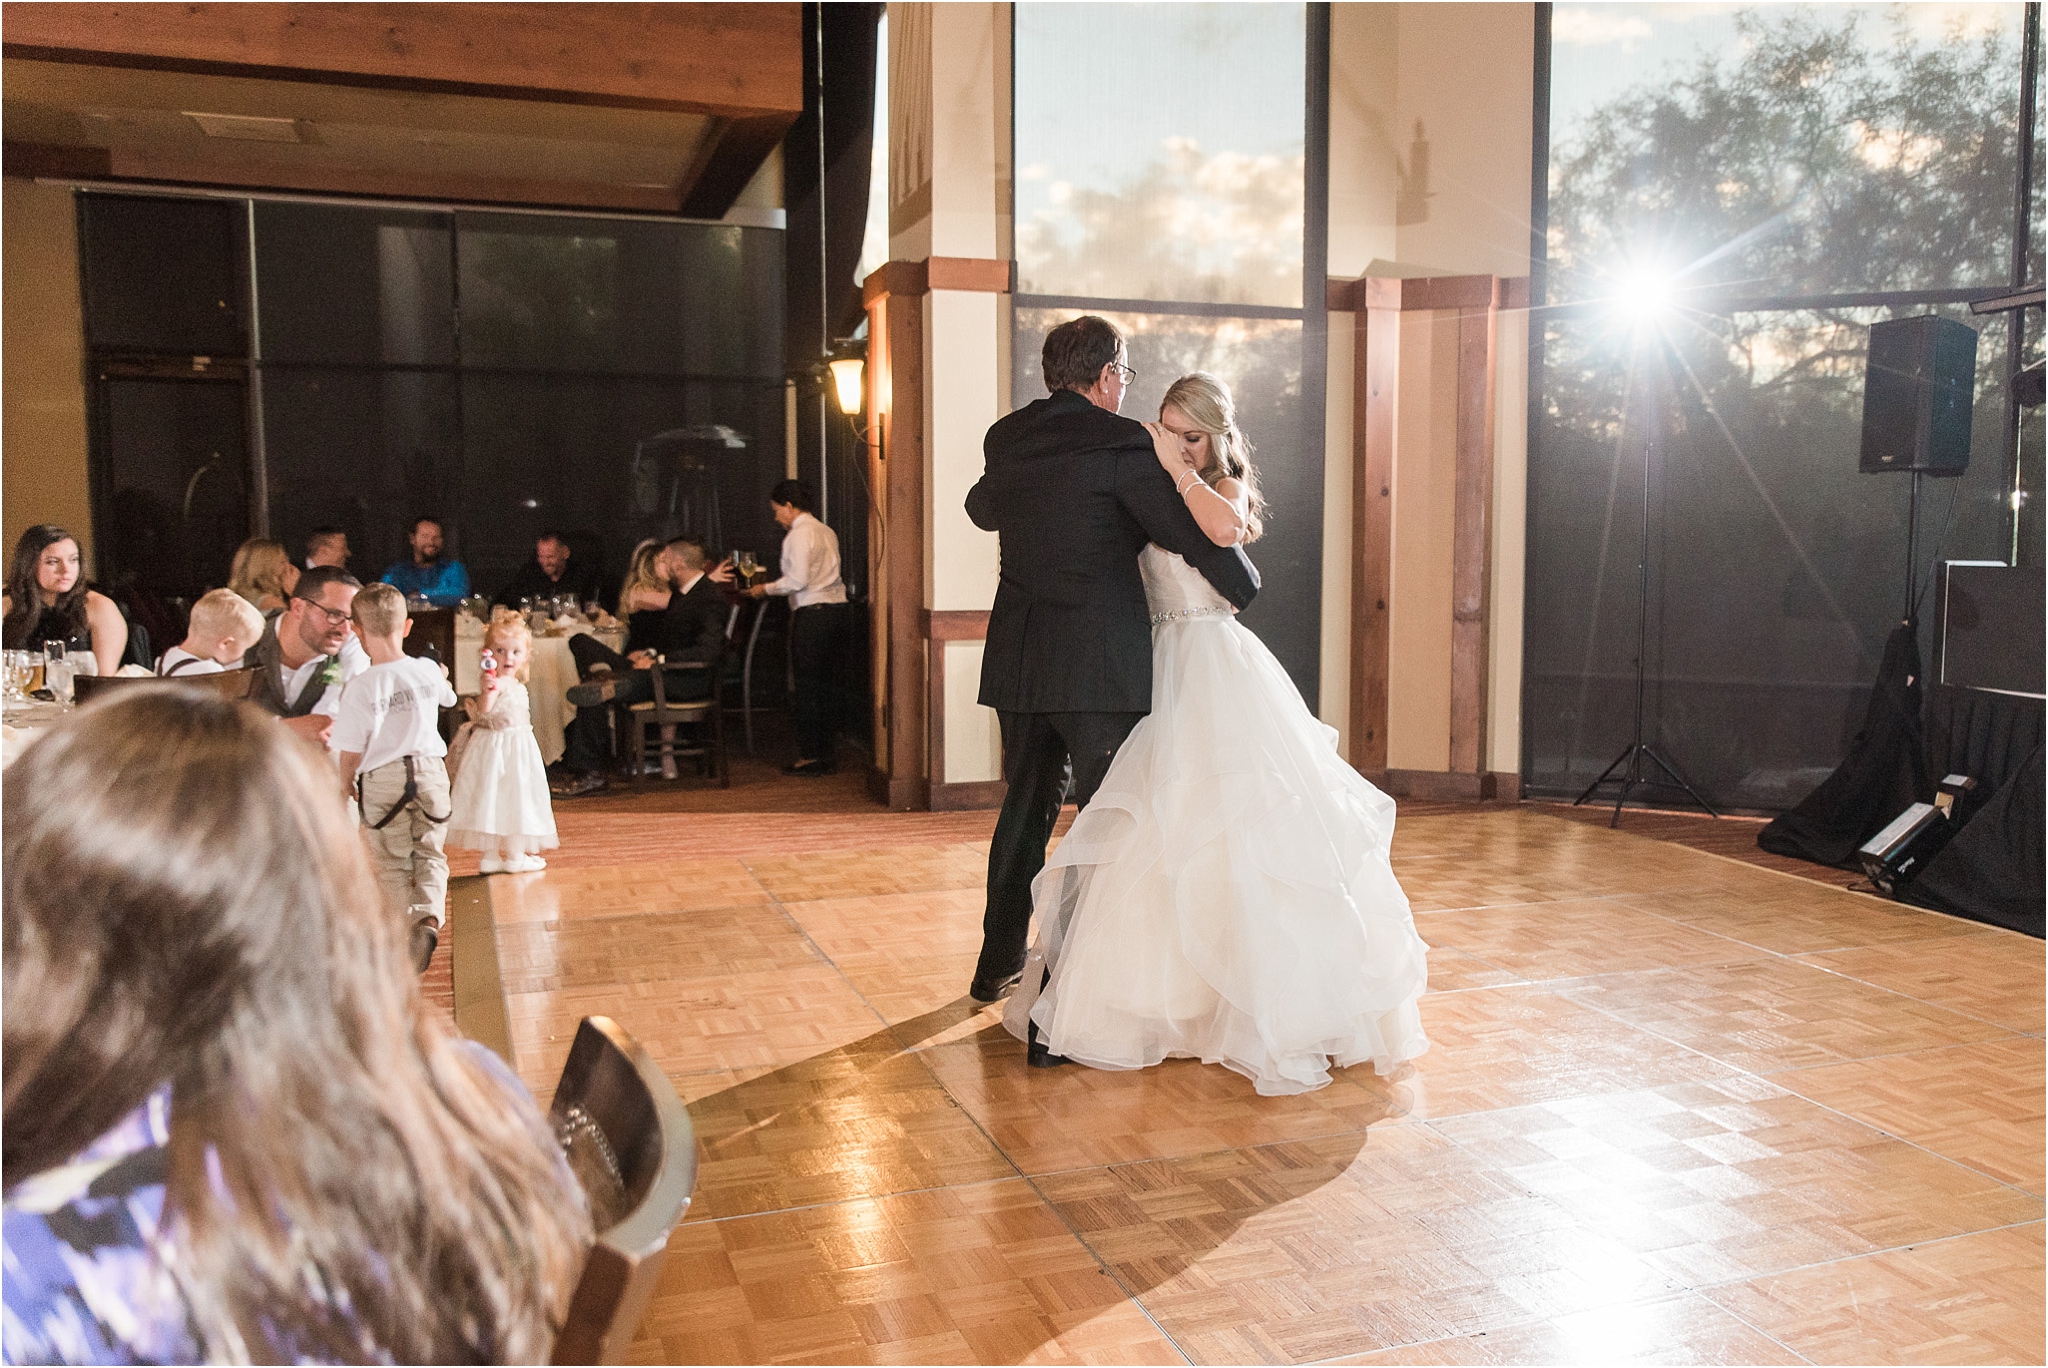 The Lodge at Ventana Canyon wedding photo of bride and father dancing